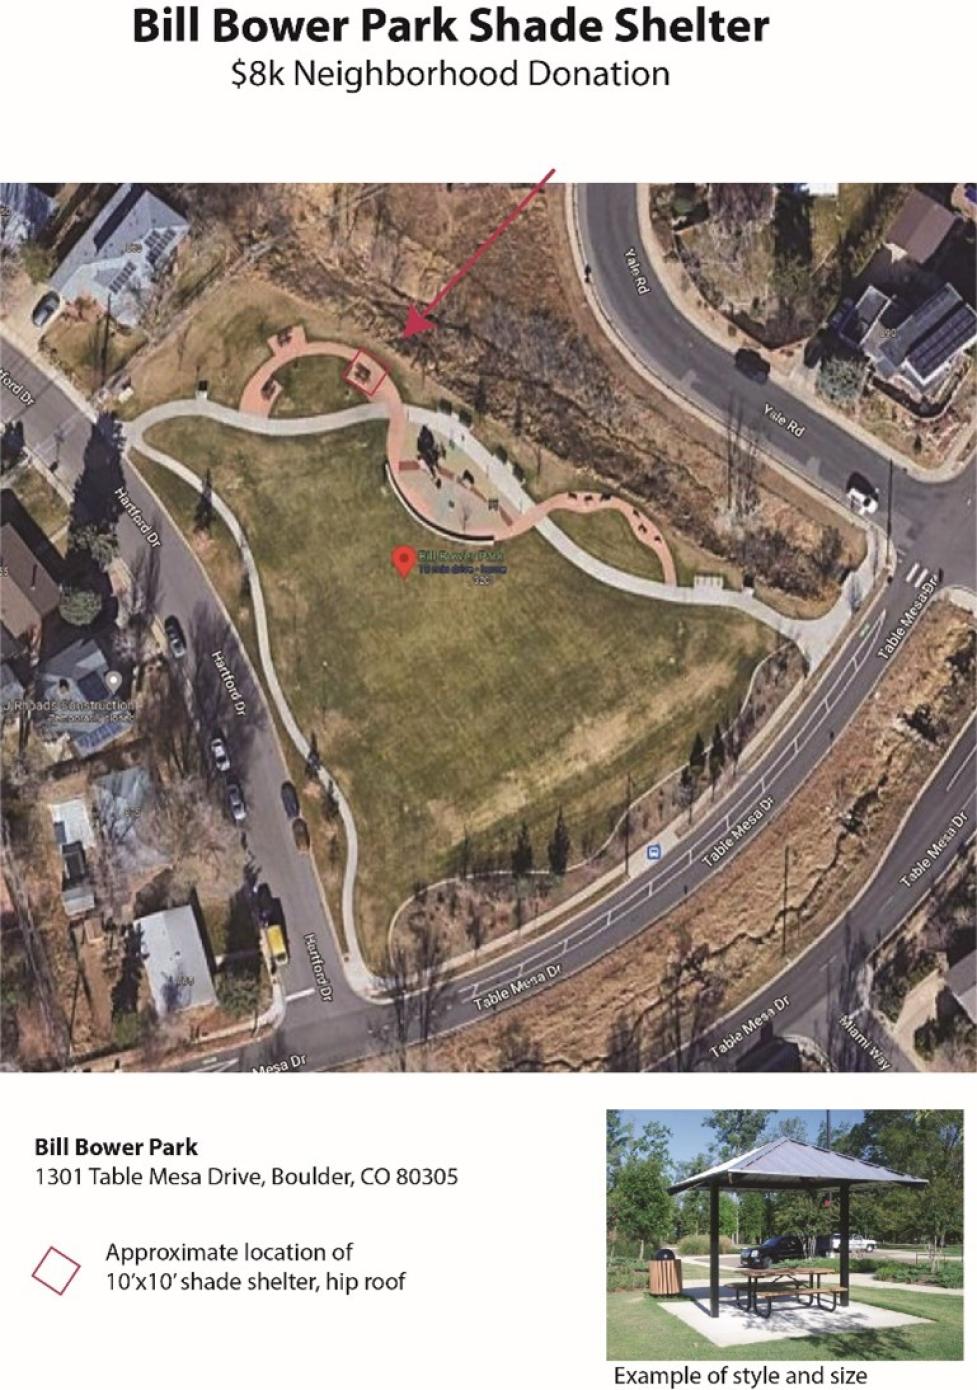 Map of planned location for shade structure near the playground at Bill Bower Park and example shade shelter photo.